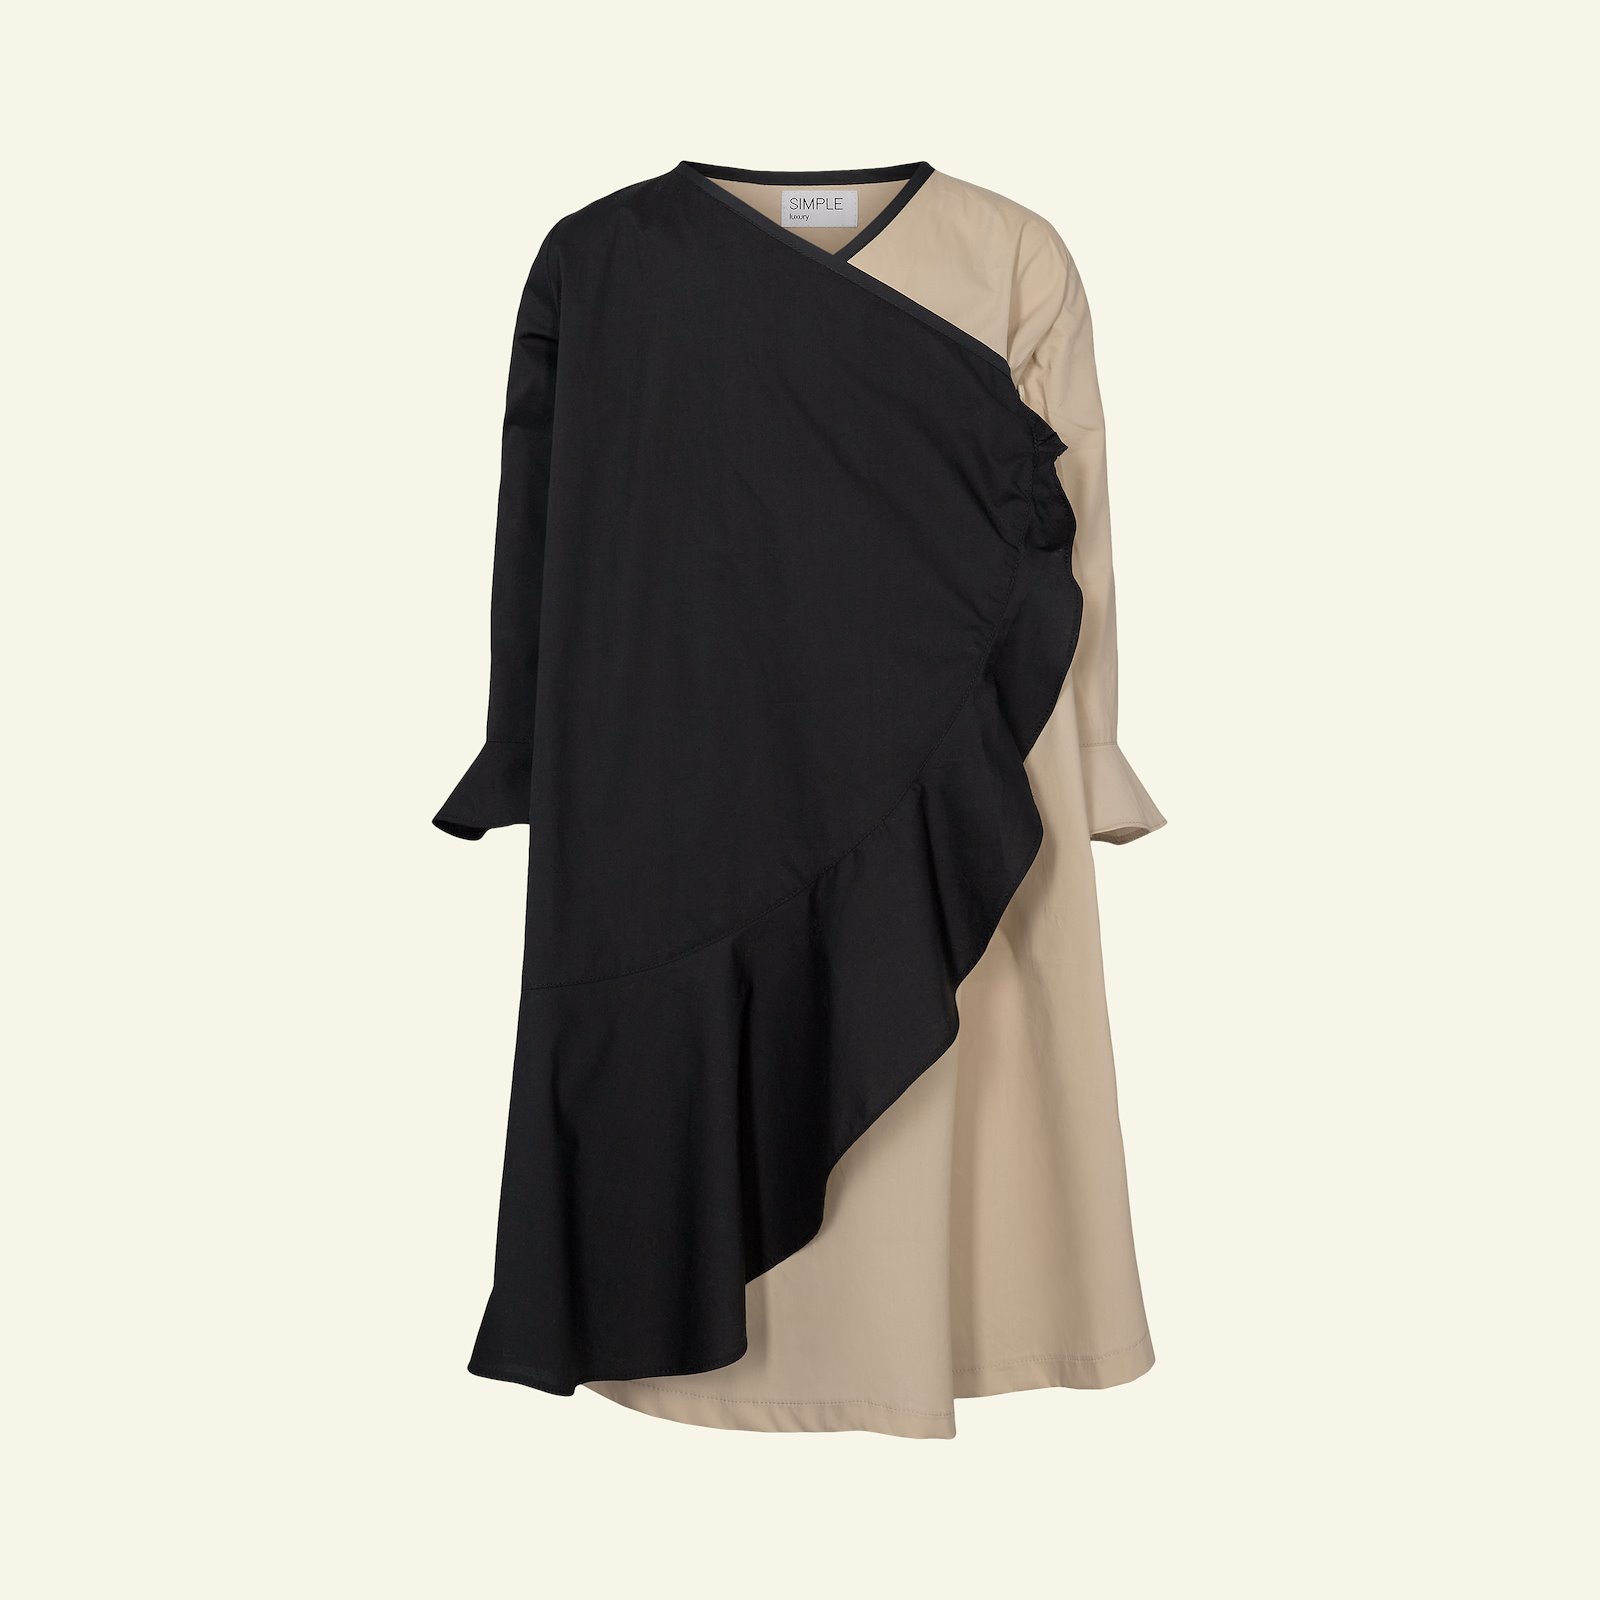 Dress und blouse with flounce, 104/4y p63066_540110_510112_64080_24865_sskit